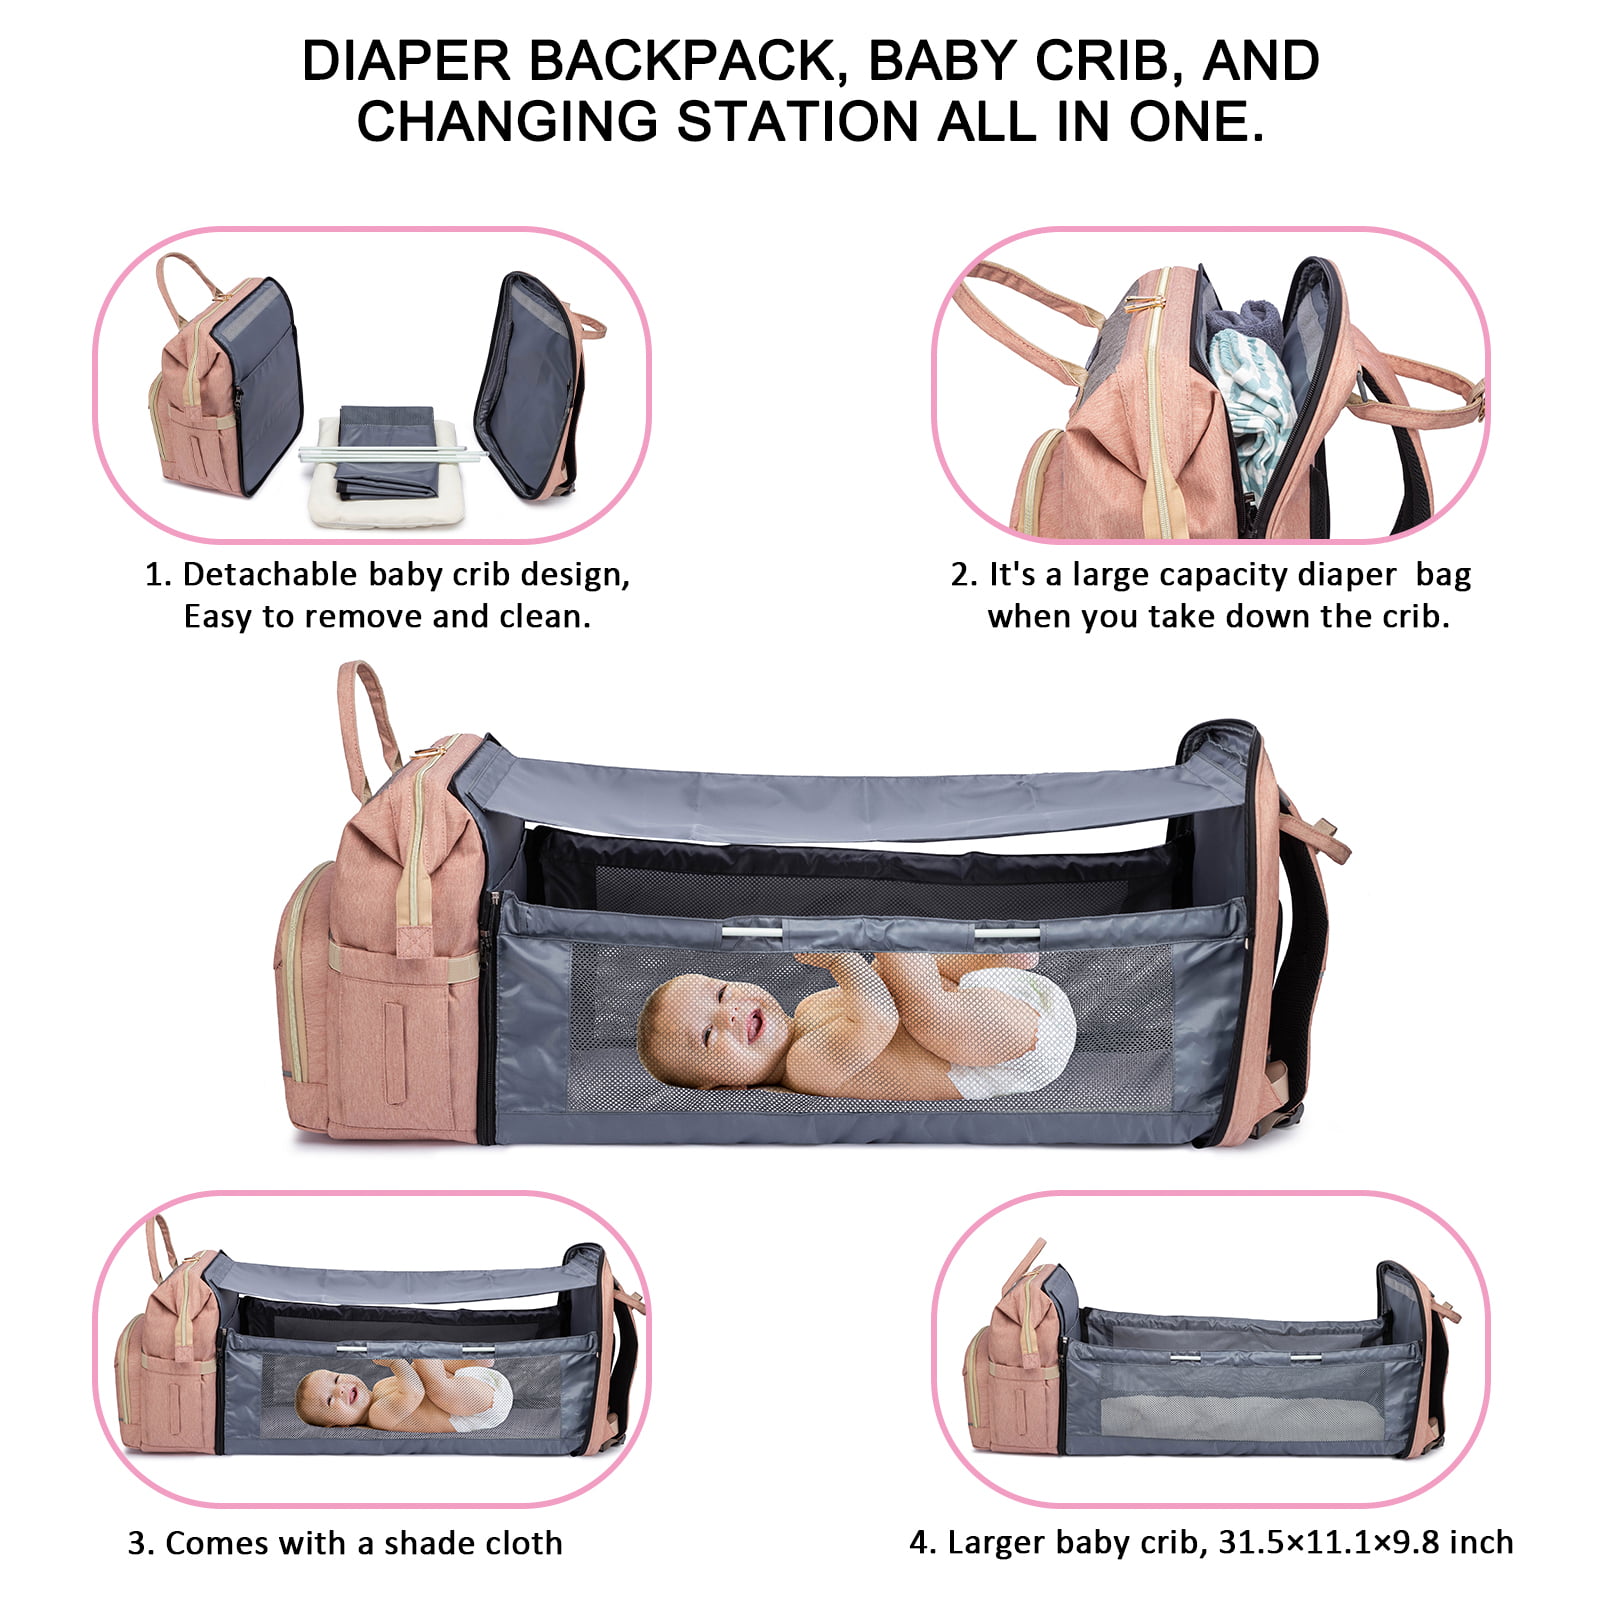 5 Chic Diaper Bags I'd Carry - jk Style